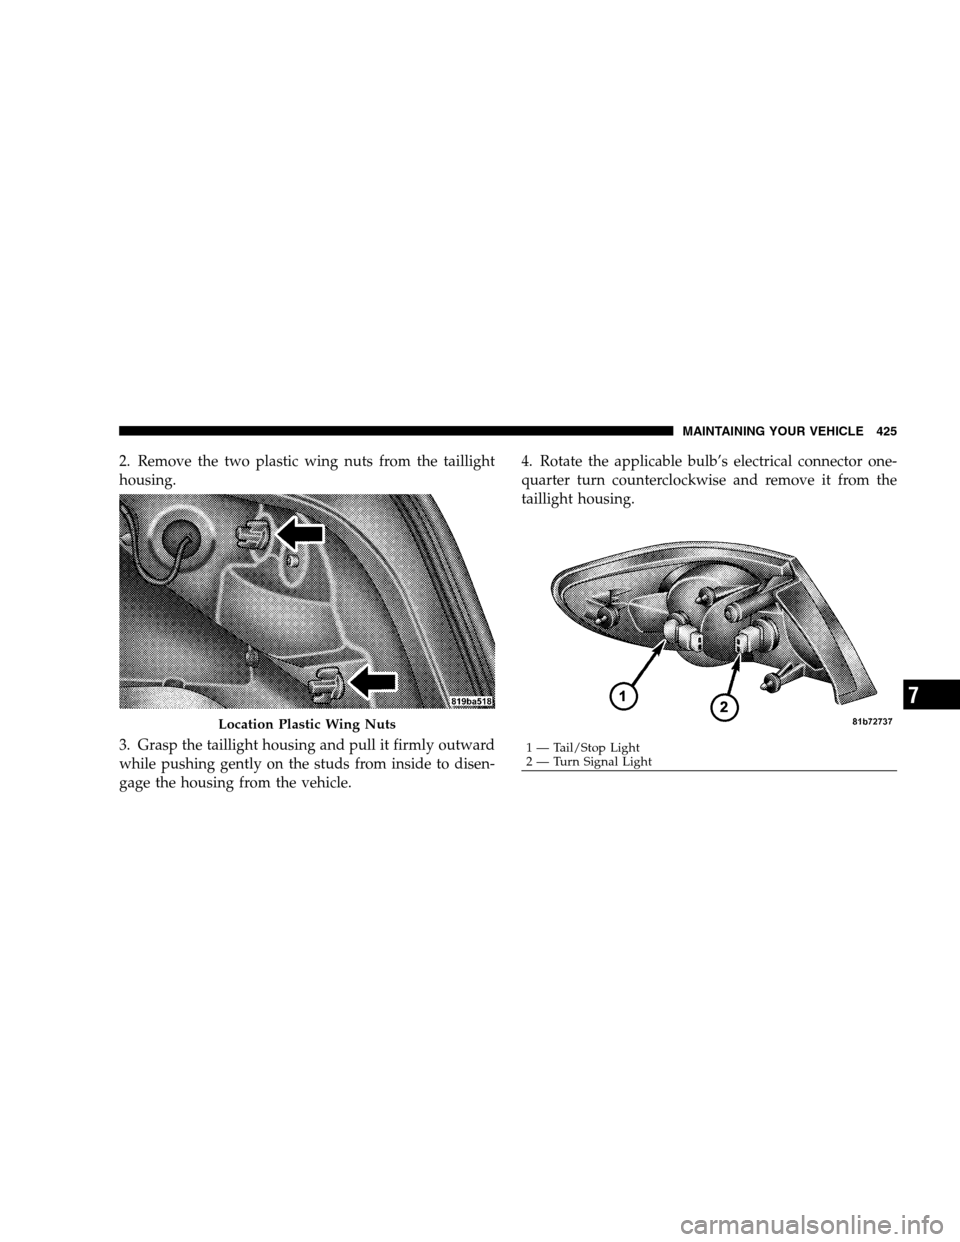 CHRYSLER SEBRING SEDAN 2008 3.G Owners Manual 2. Remove the two plastic wing nuts from the taillight
housing.
3. Grasp the taillight housing and pull it firmly outward
while pushing gently on the studs from inside to disen-
gage the housing from 